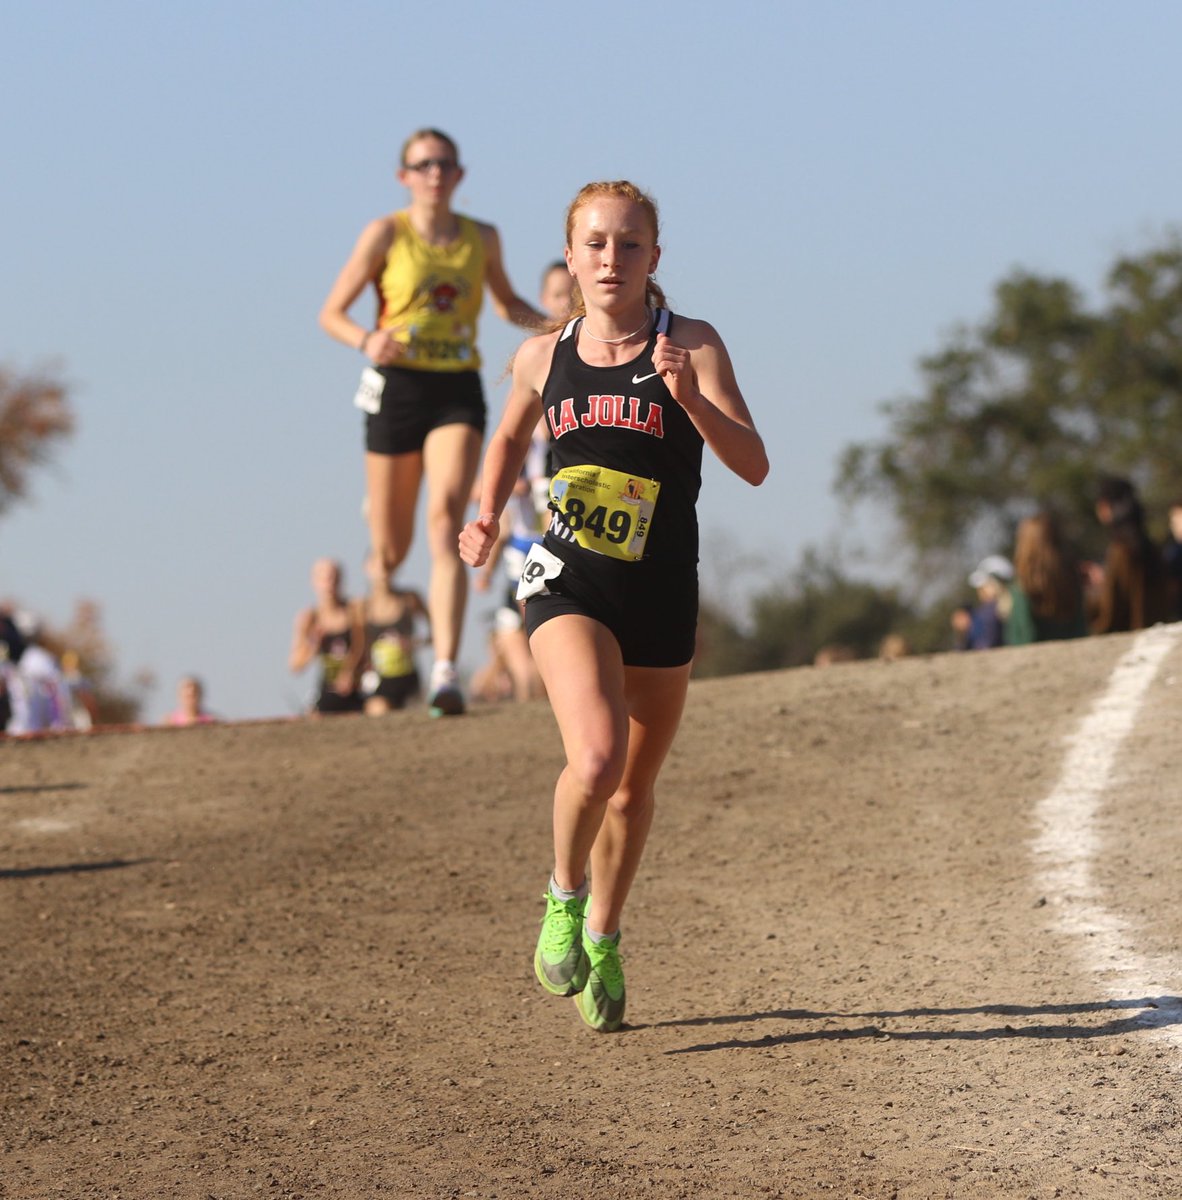 Chiara Dailey of La Jolla wins the final race of the California State Meet, D4, in a time of 17:09.2